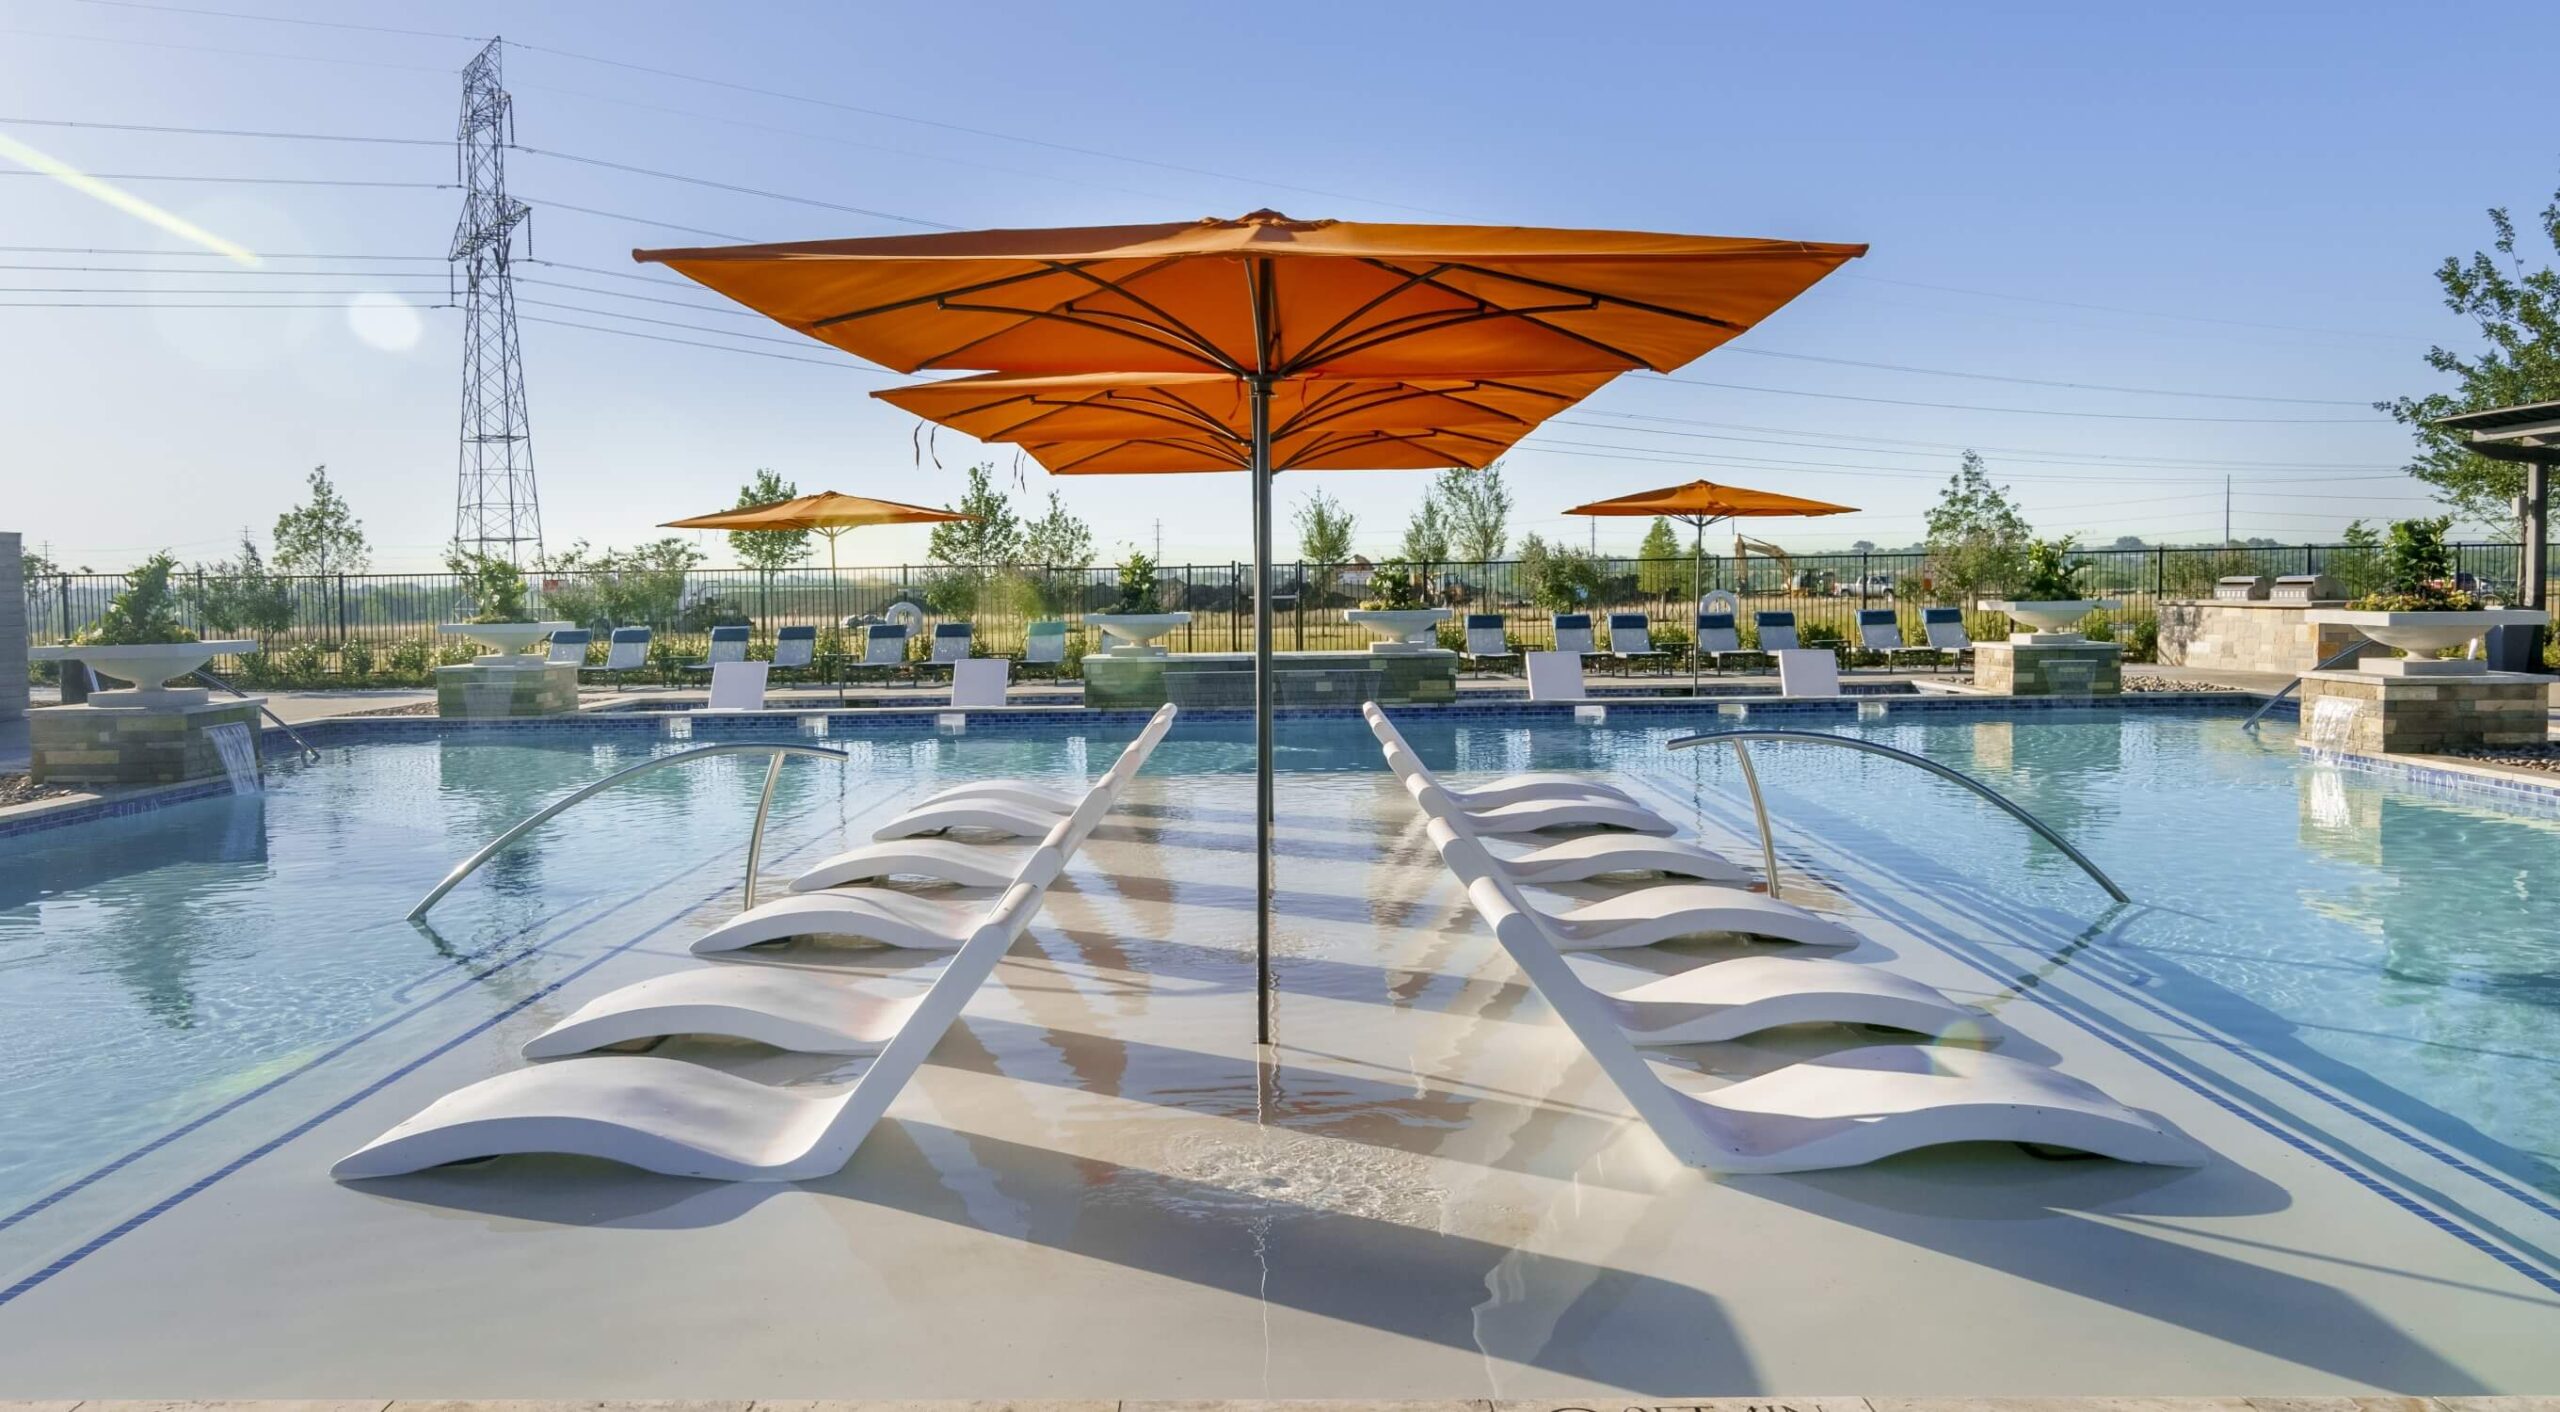 A family-friendly pool with chairs and umbrellas in the Goodland Community.